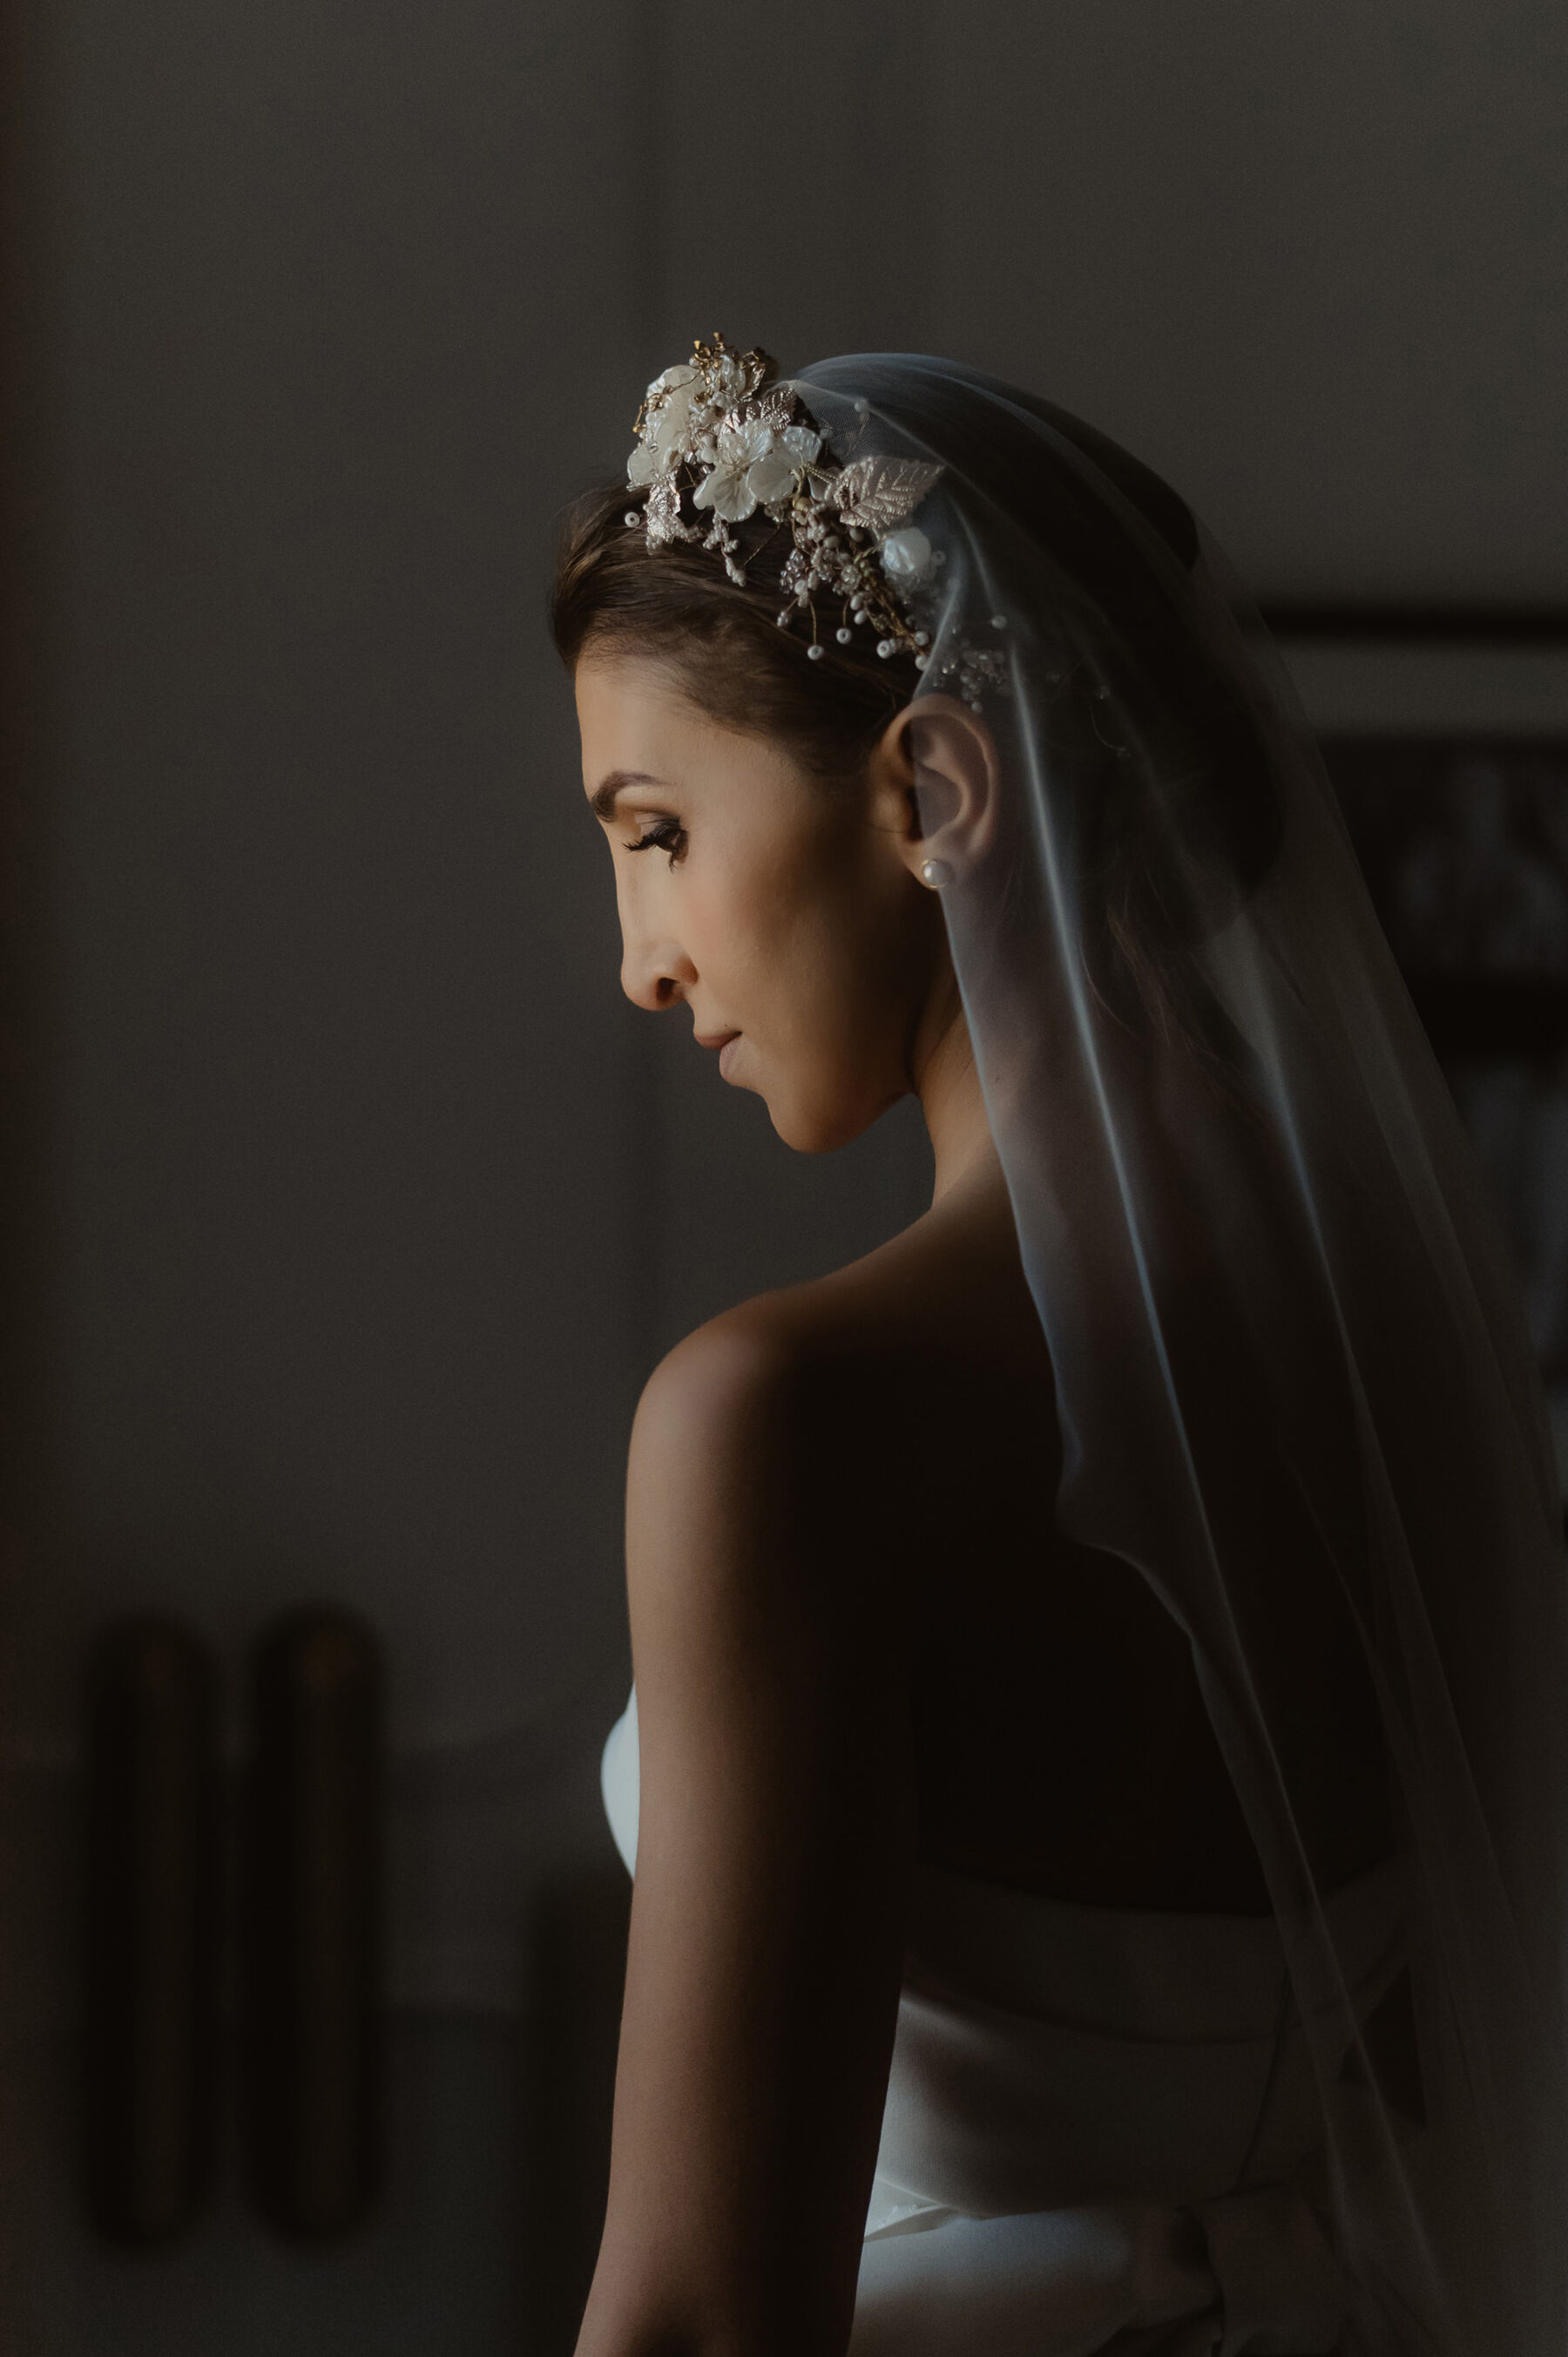 Bride with elegant veil & mother of pearl headpiece.